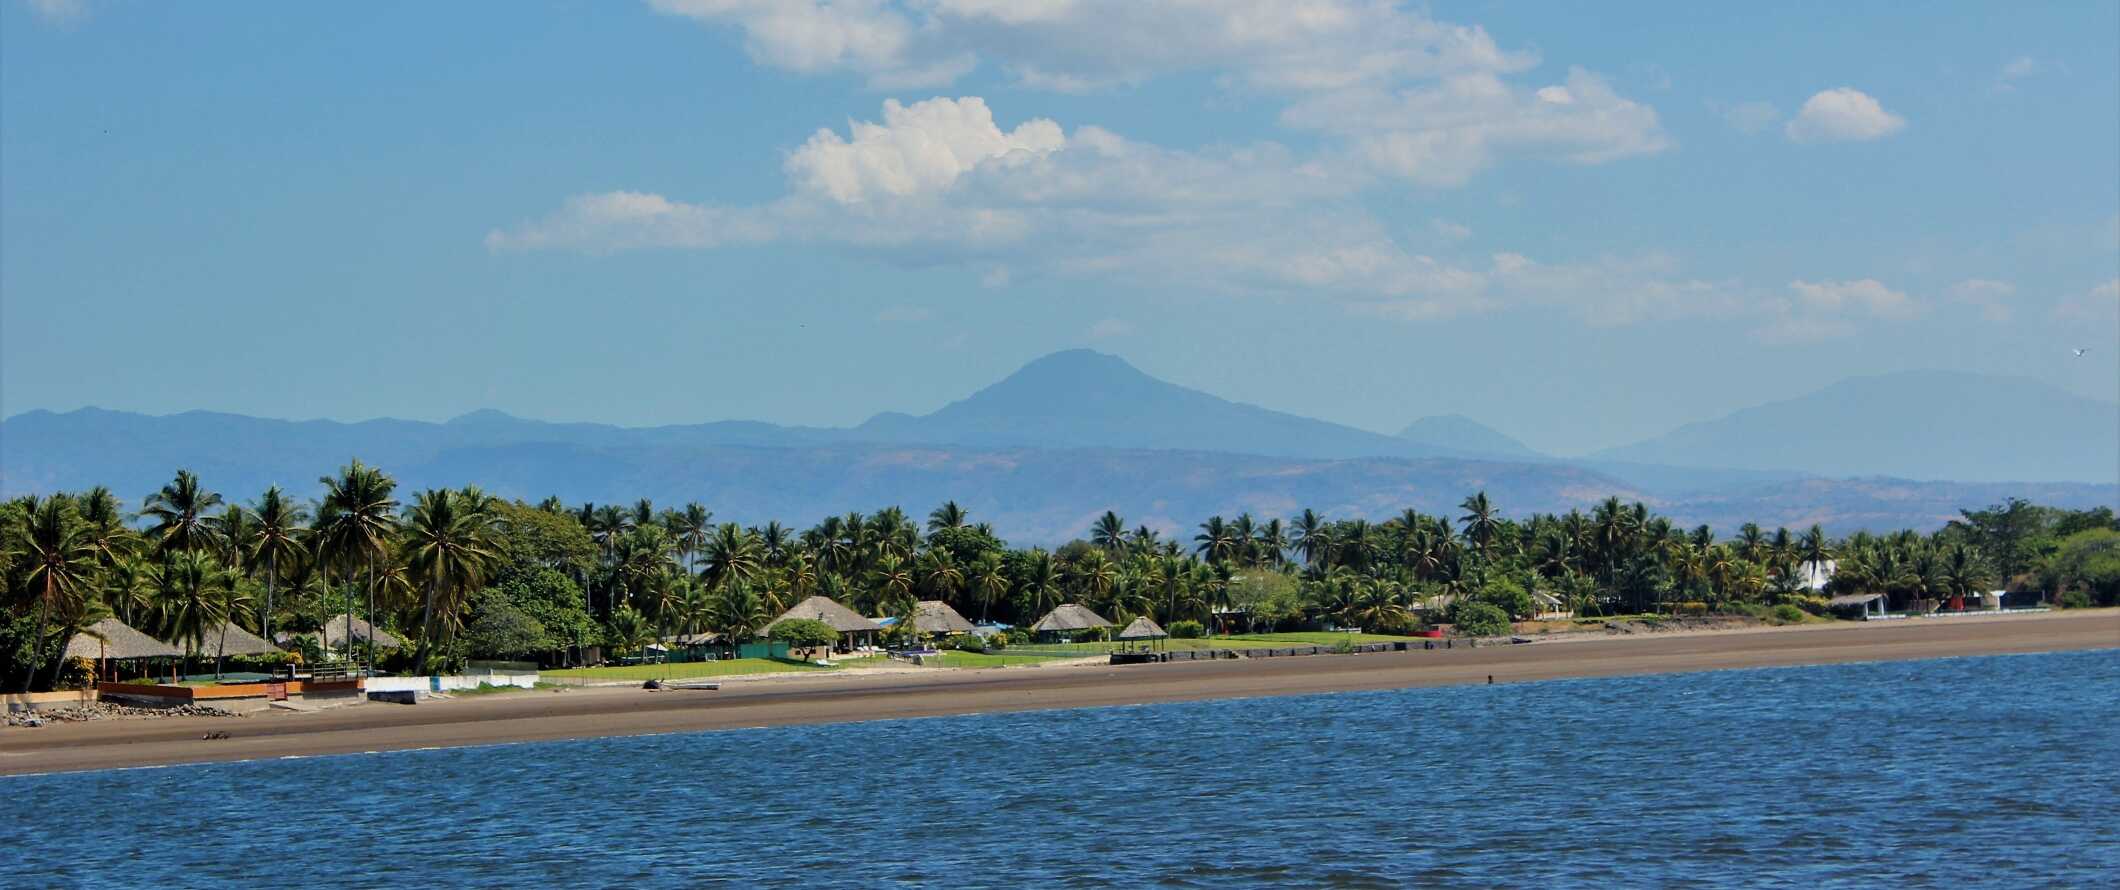 View of huts along the beach with a volcano in the background in El Salvador